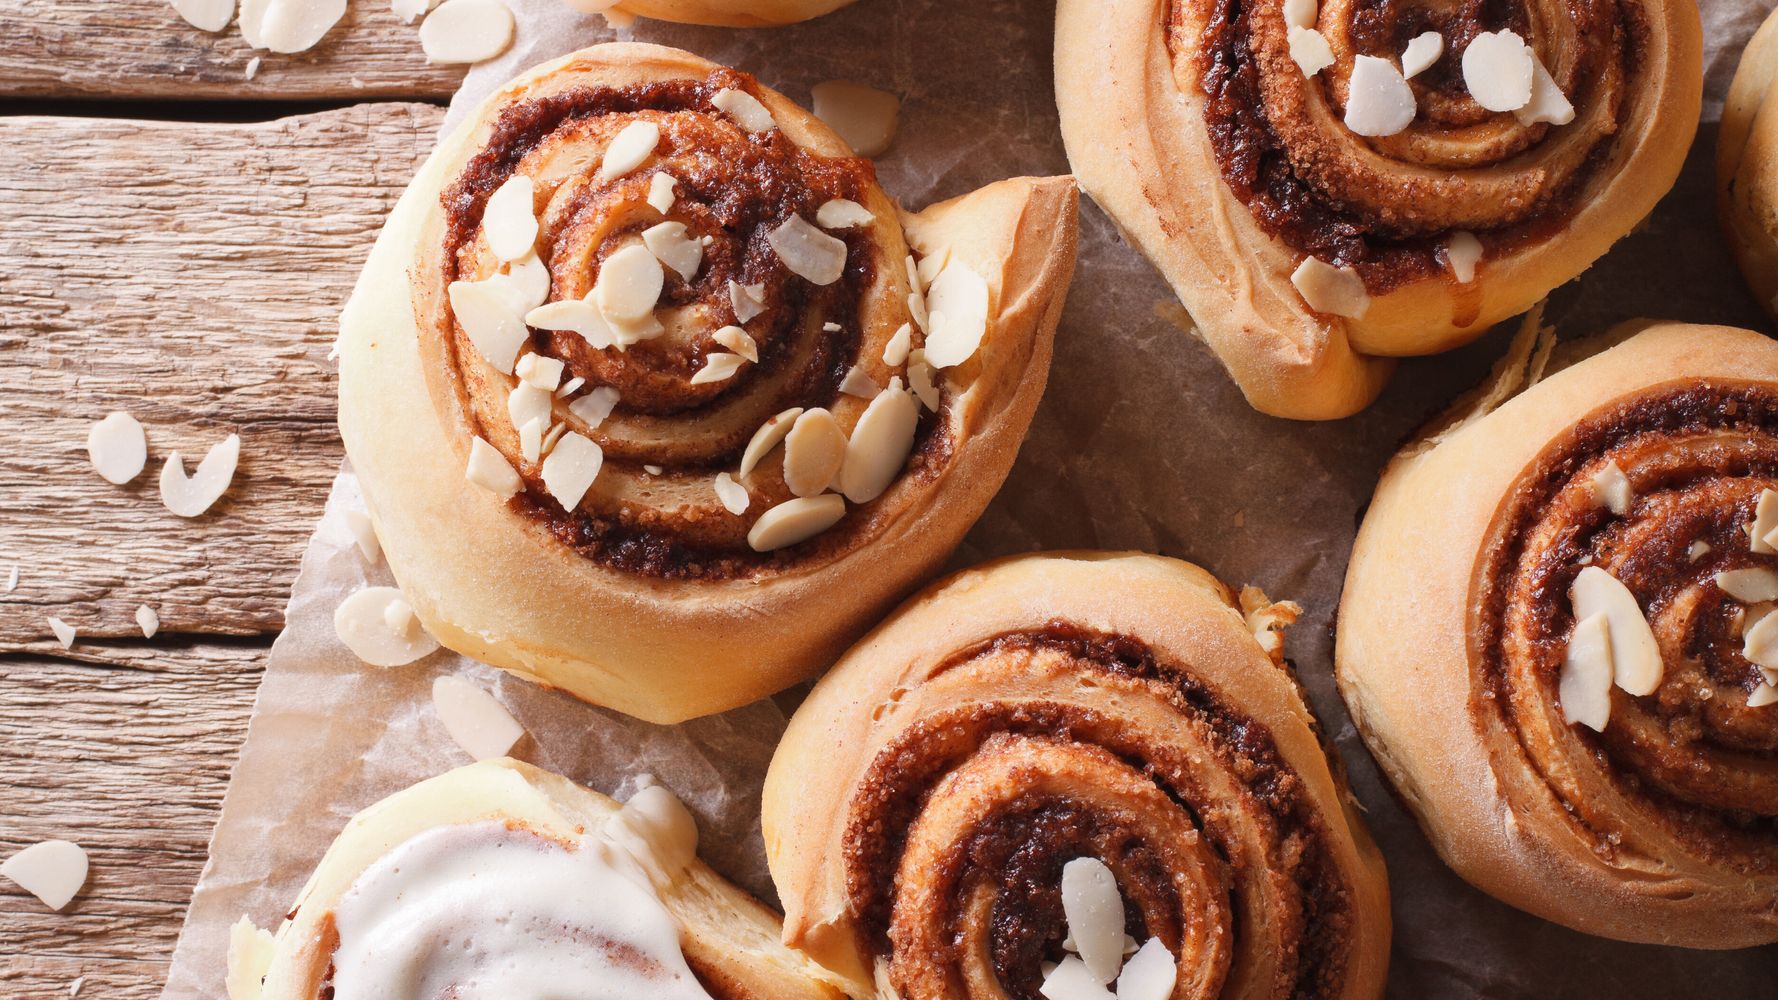 6 Cinnamon Roll Recipes To Keep You Nice And Toasty.